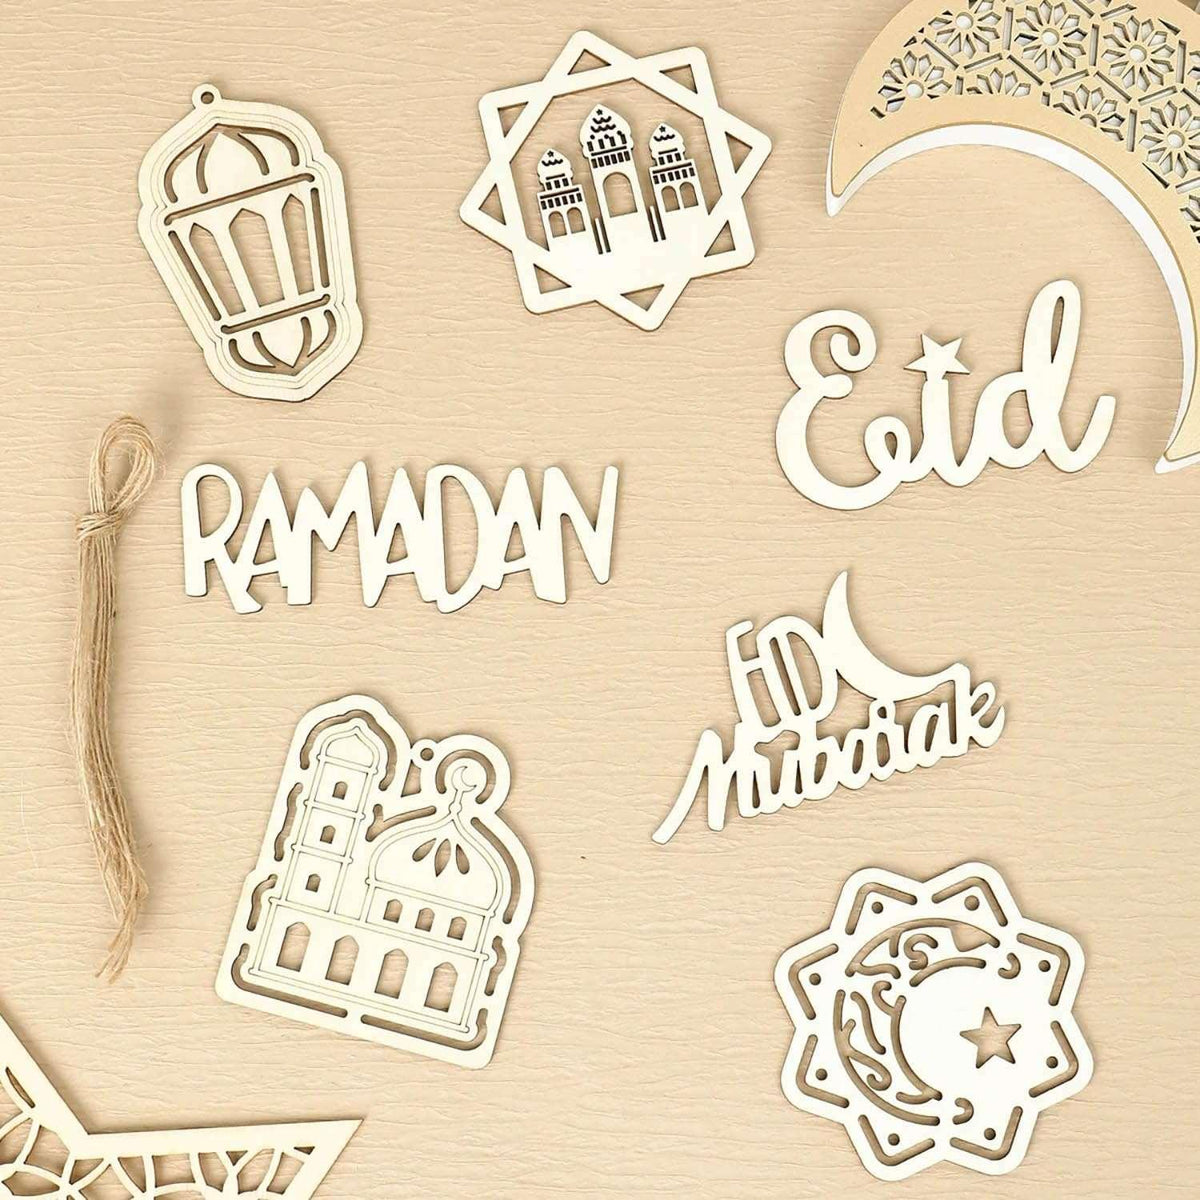 Haoser Set of 10 Eid Special Wooden Pendants, Islamic Festival Decorations, Crescent Moon and Star Design, Handcrafted Eid Mubarak Gifts, Wooden Eid Ornaments, Ramadan and Eid Home Decor (DGN-1) - Haoser